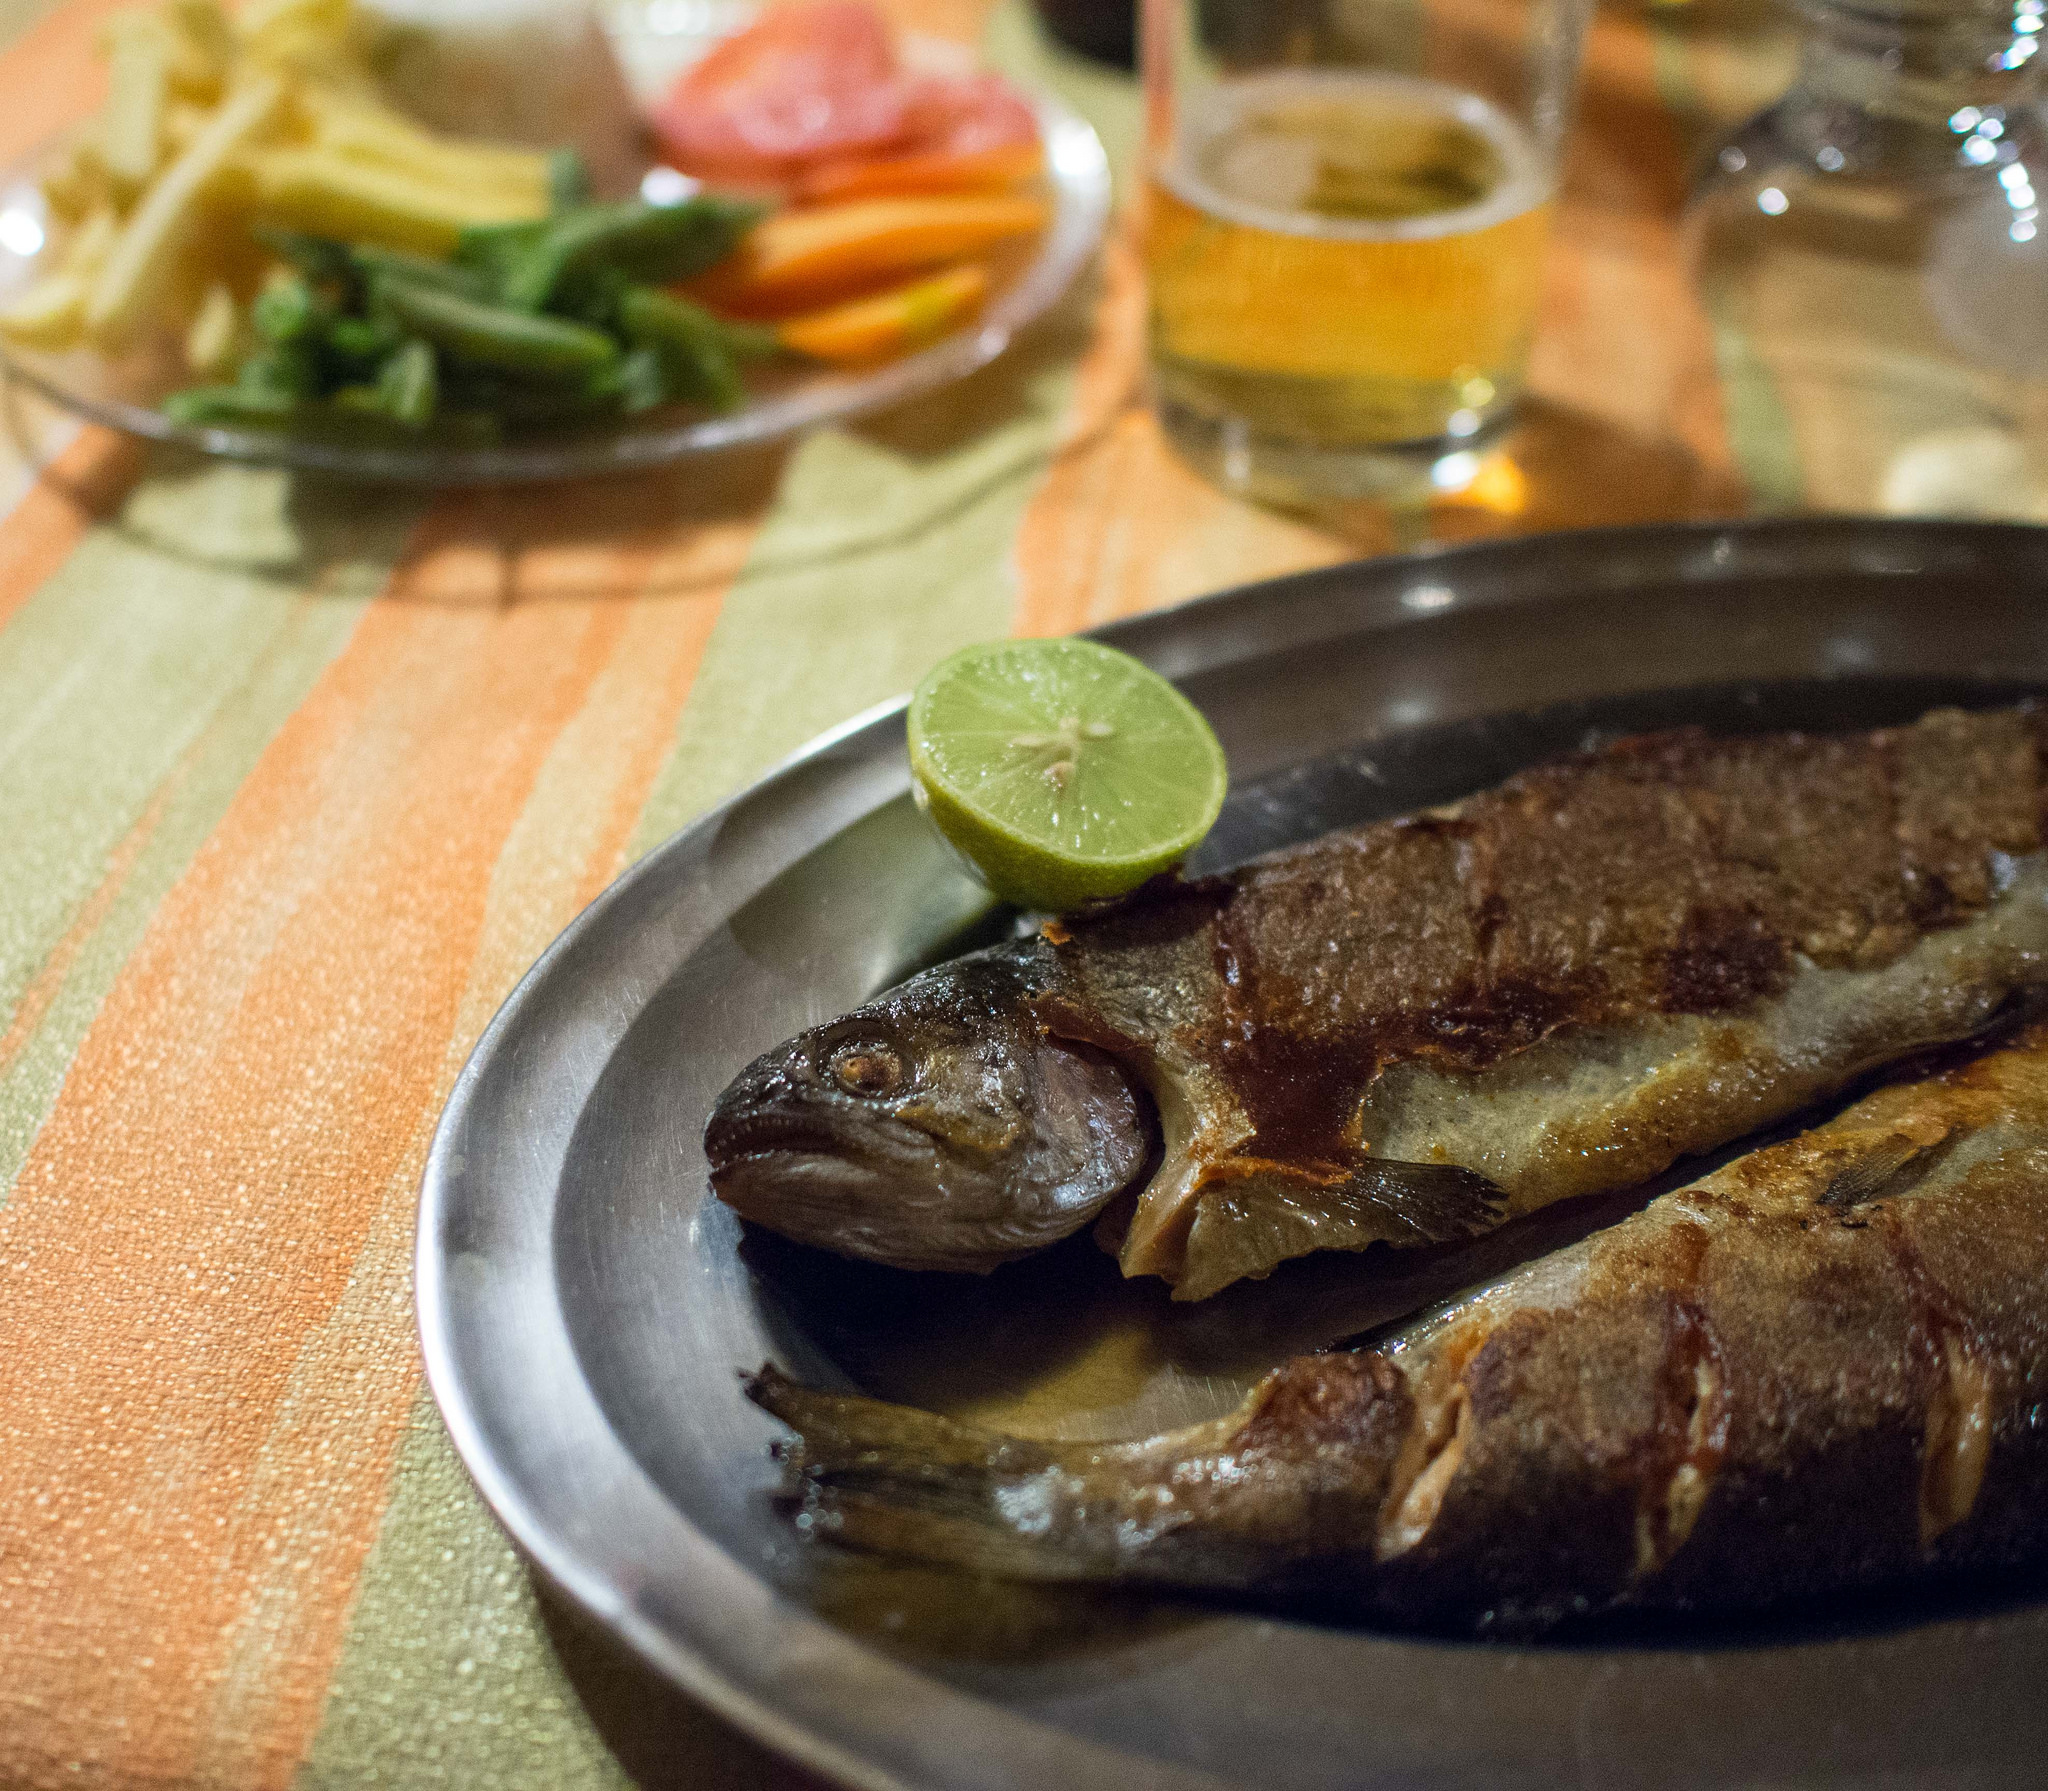   Trucha  (trout), freshwater fish from Lake Titicaca, “is delicious and a big deal,” says Encinas. “Bolivia is a landlocked country so seafood is not something you find on every corner.” 